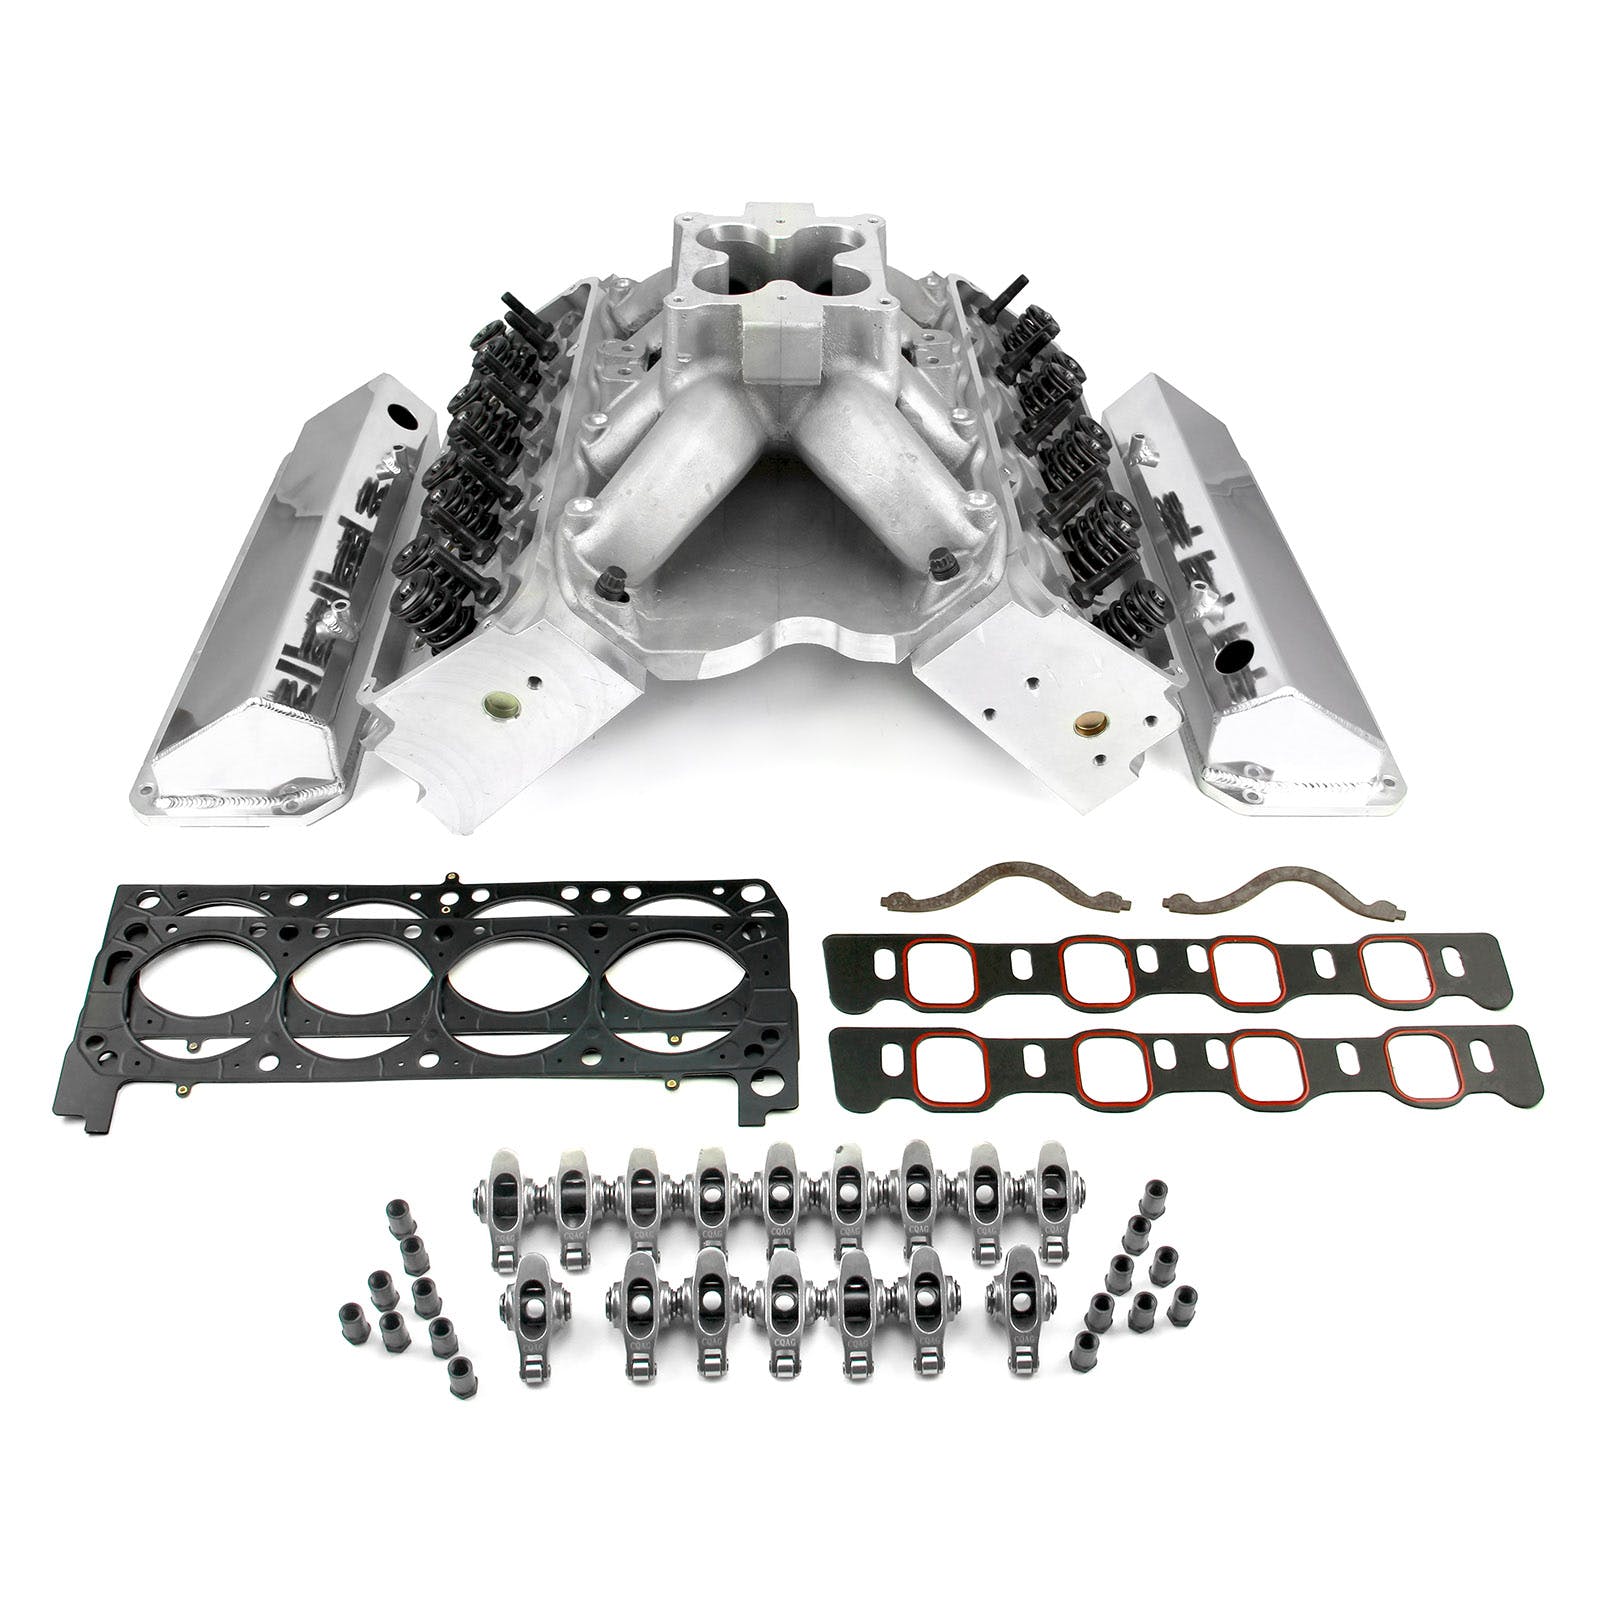 Speedmaster PCE435.1057 9.5 Deck Fusion Manifold Hyd FT Cylinder Head Top End Engine Combo Kit